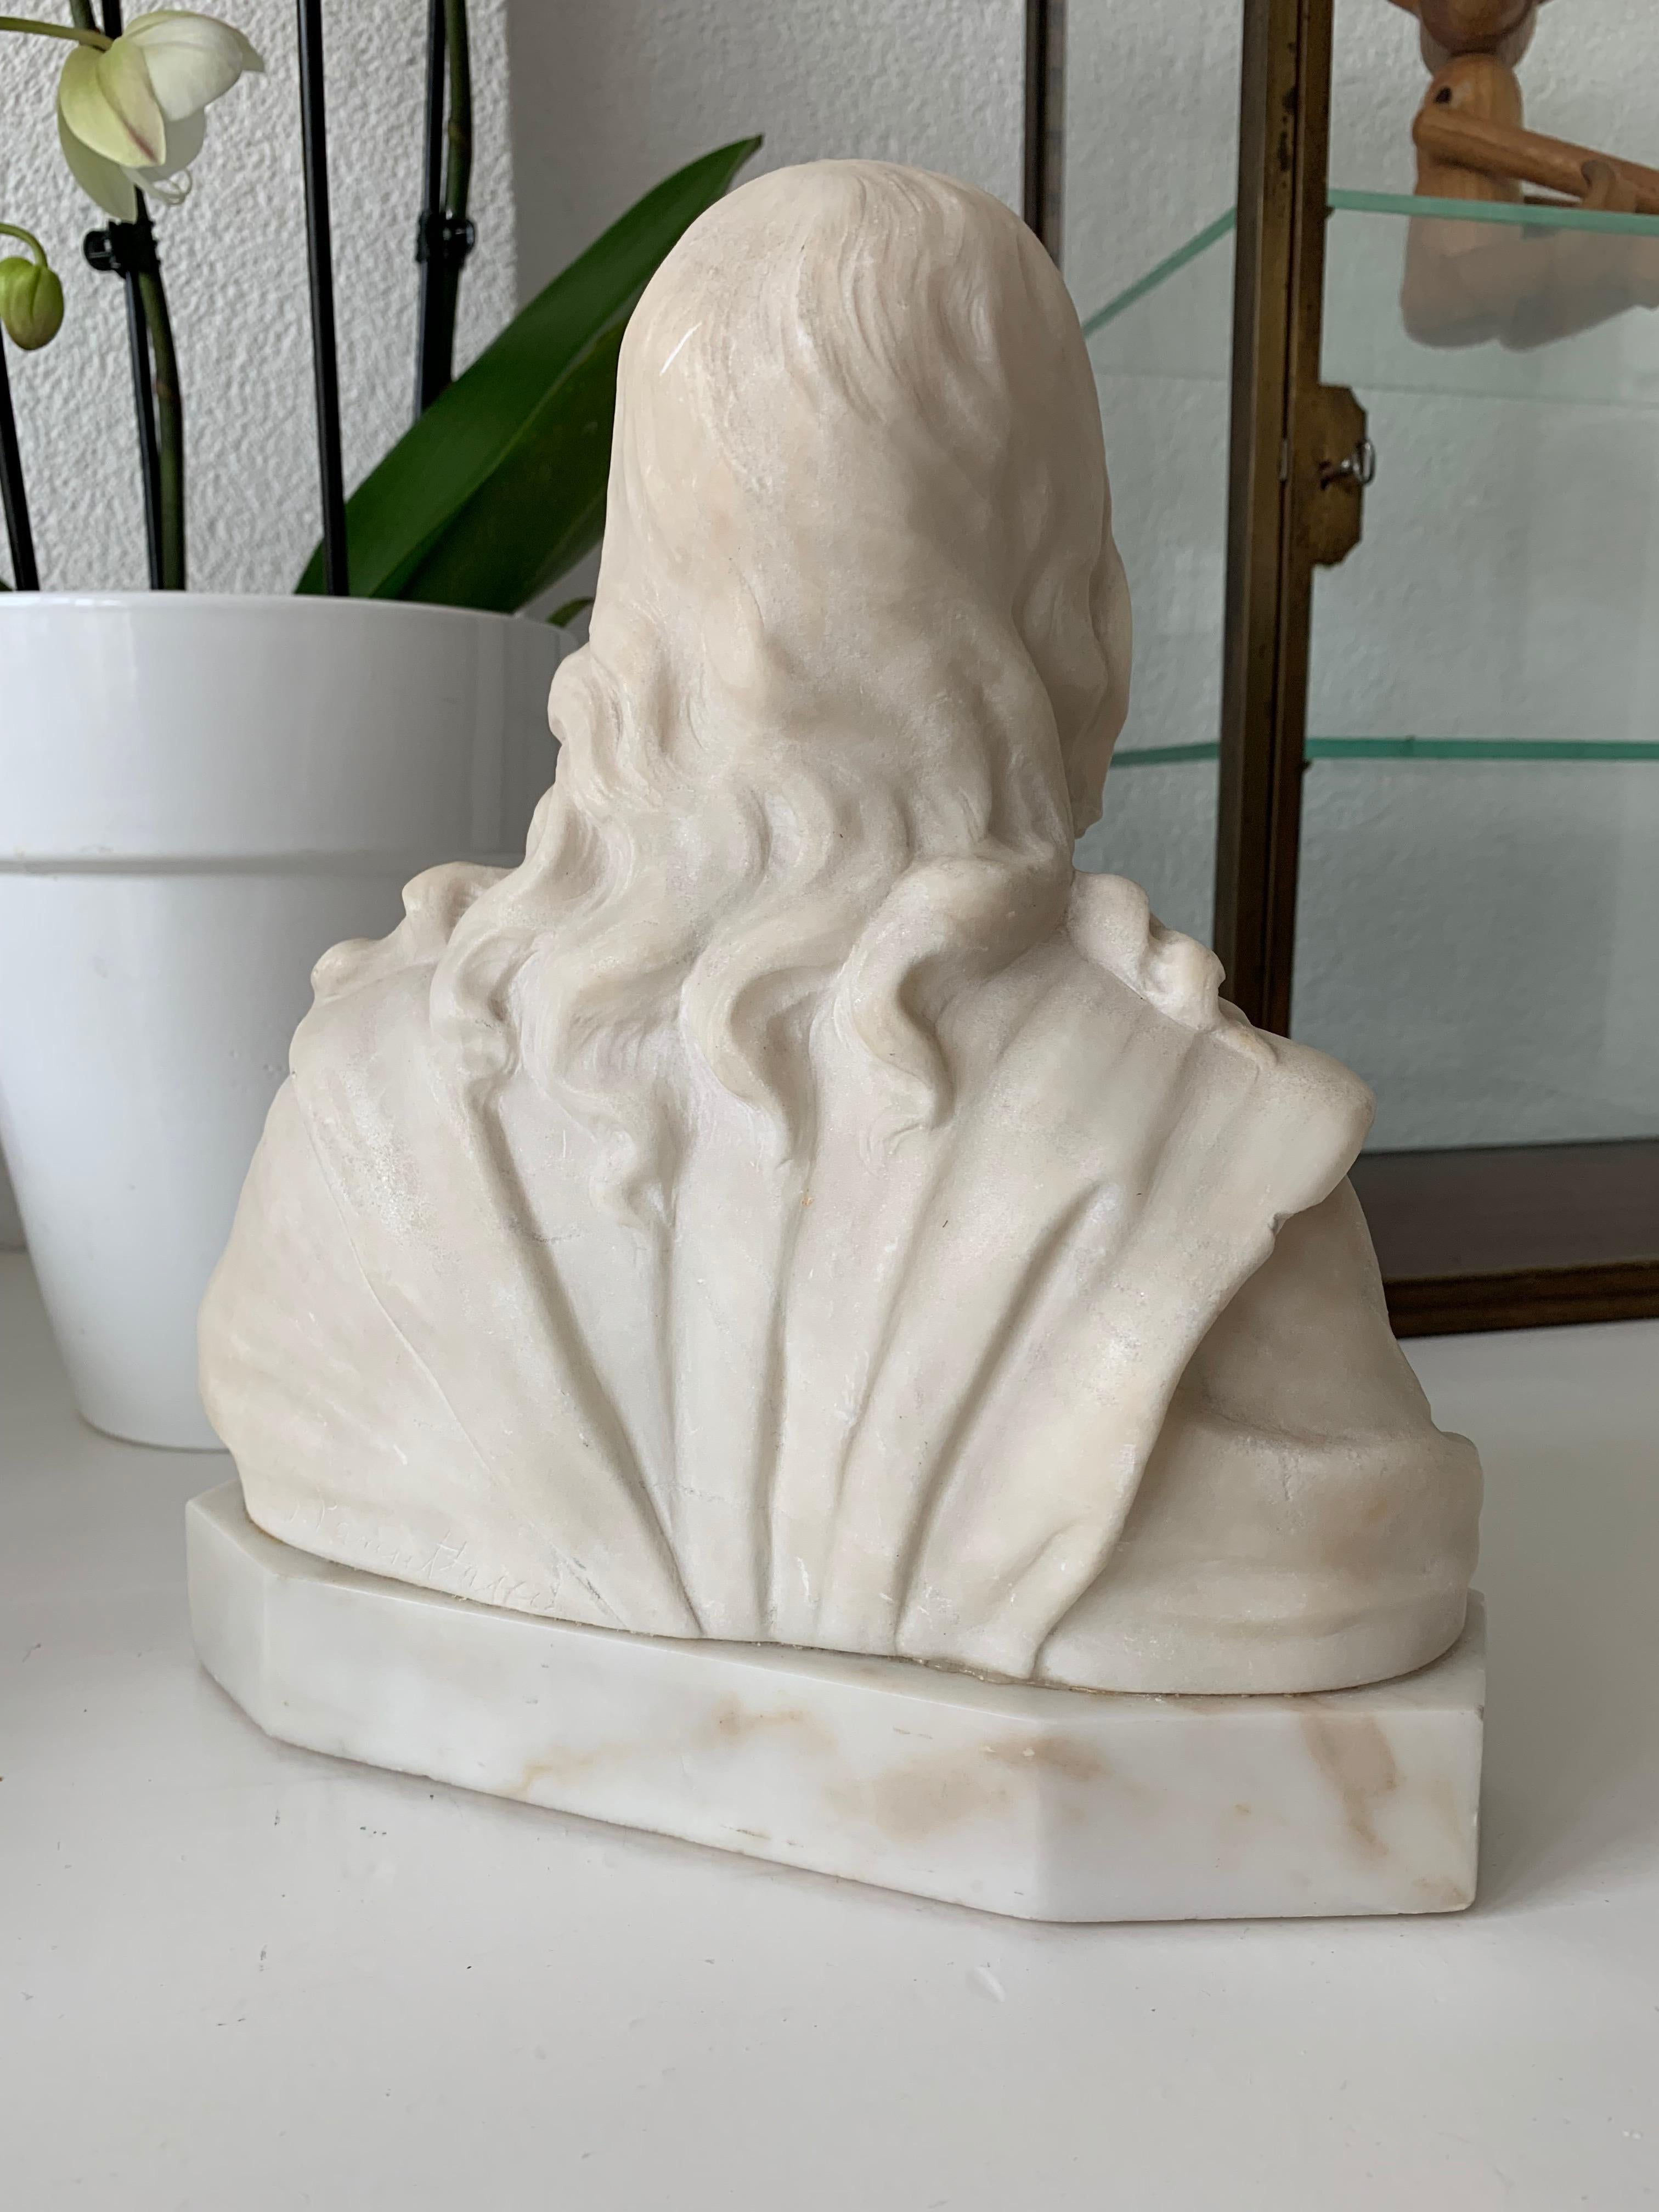 Early 1900s Signed Marble Sculpture / Bust of Jesus Christ on an Art Deco Base 3